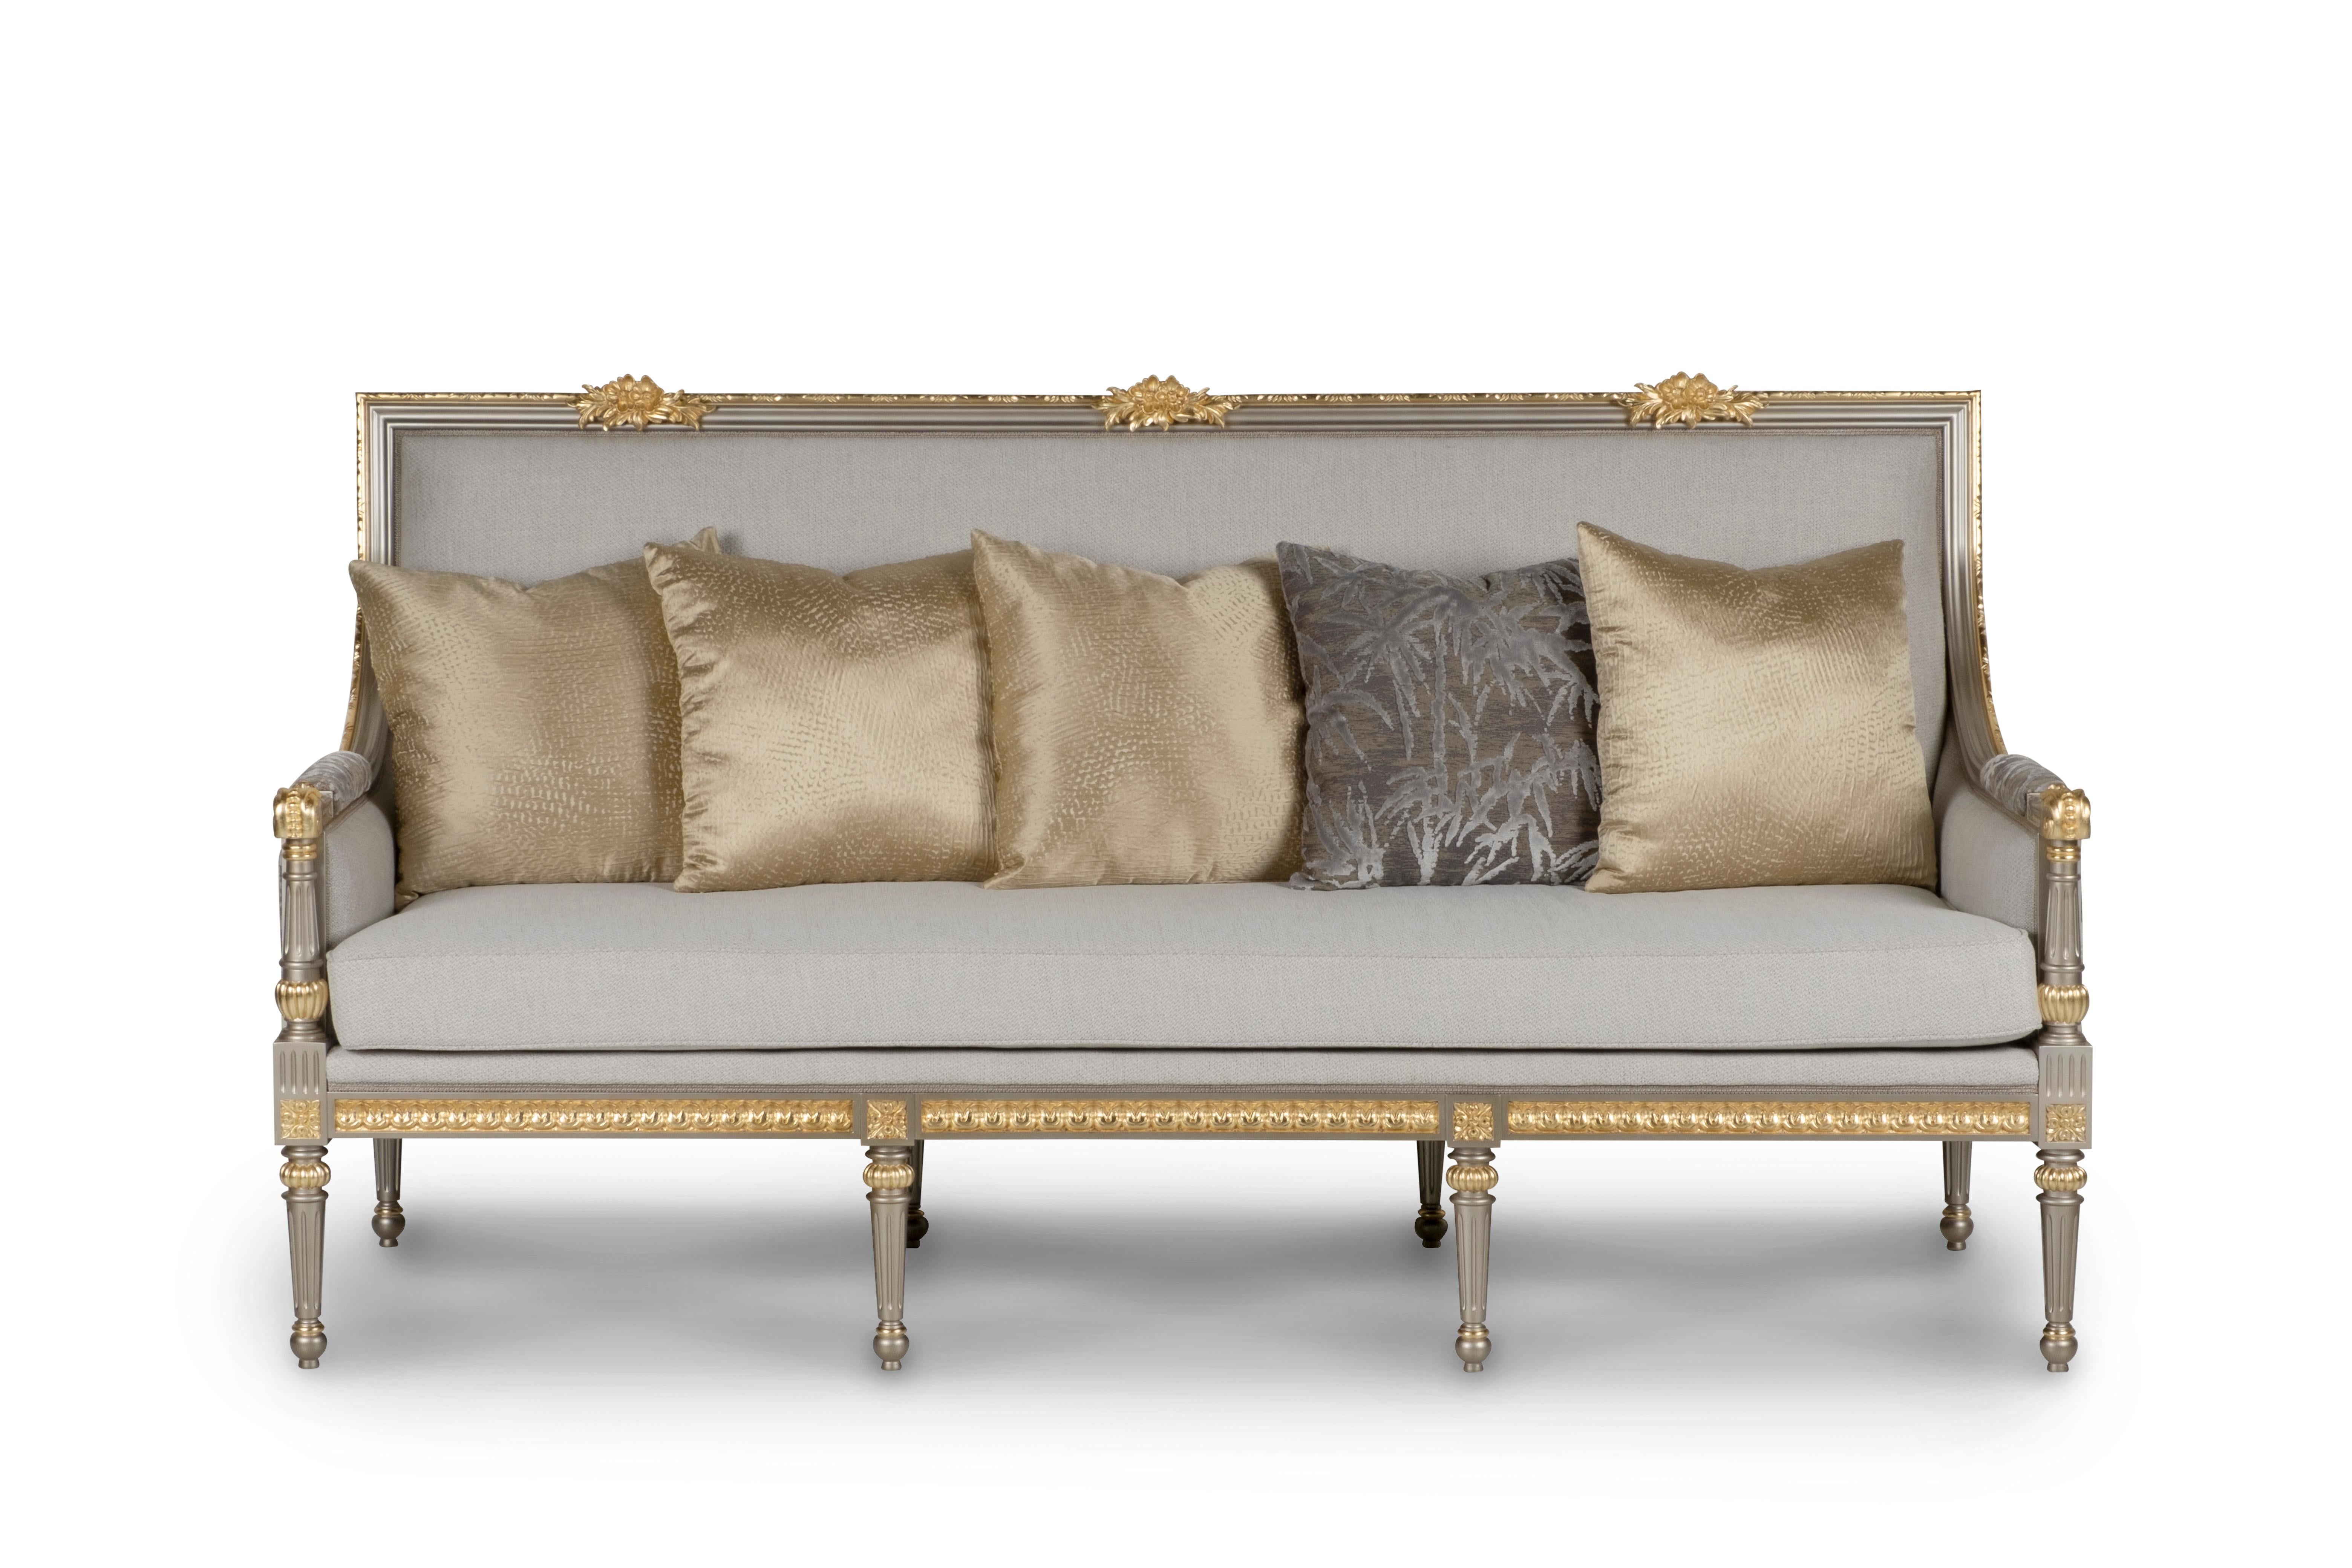 Sofa Donna, Neoclassical Collection, Handcrafted in Portugal - Europe by GF Modern.

This Sofa adds a sophisticated and refined touch to any living area. The sofa is upholstered in bronze jacquard-patterned velvet and beige cotton-linen fabric with